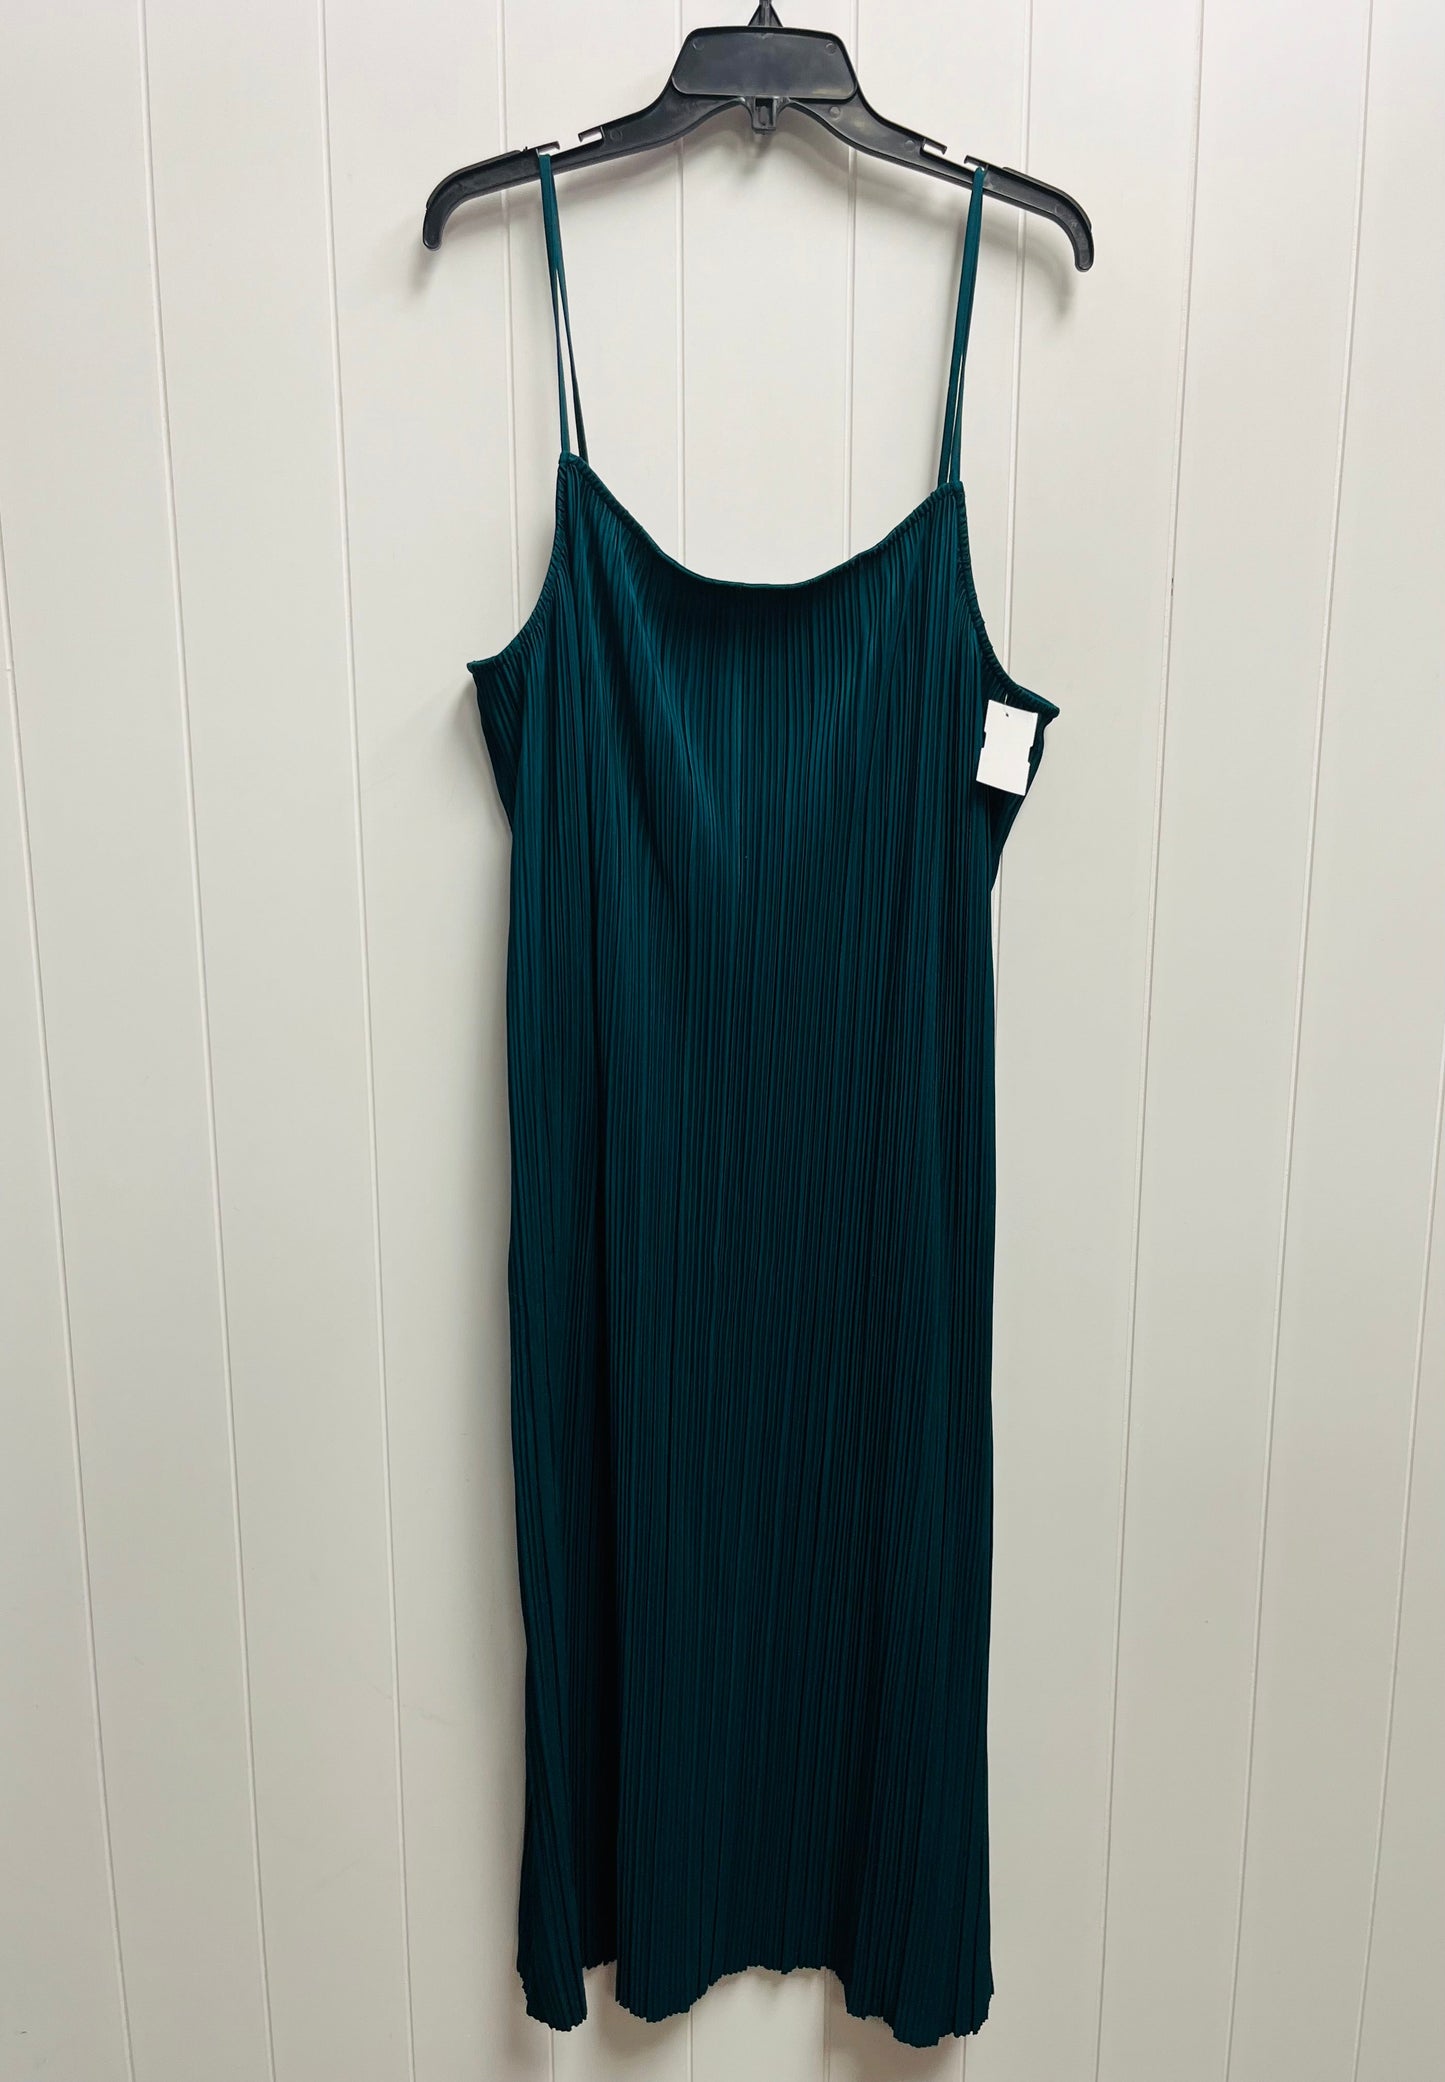 Teal Dress Casual Midi Time And Tru, Size 3x